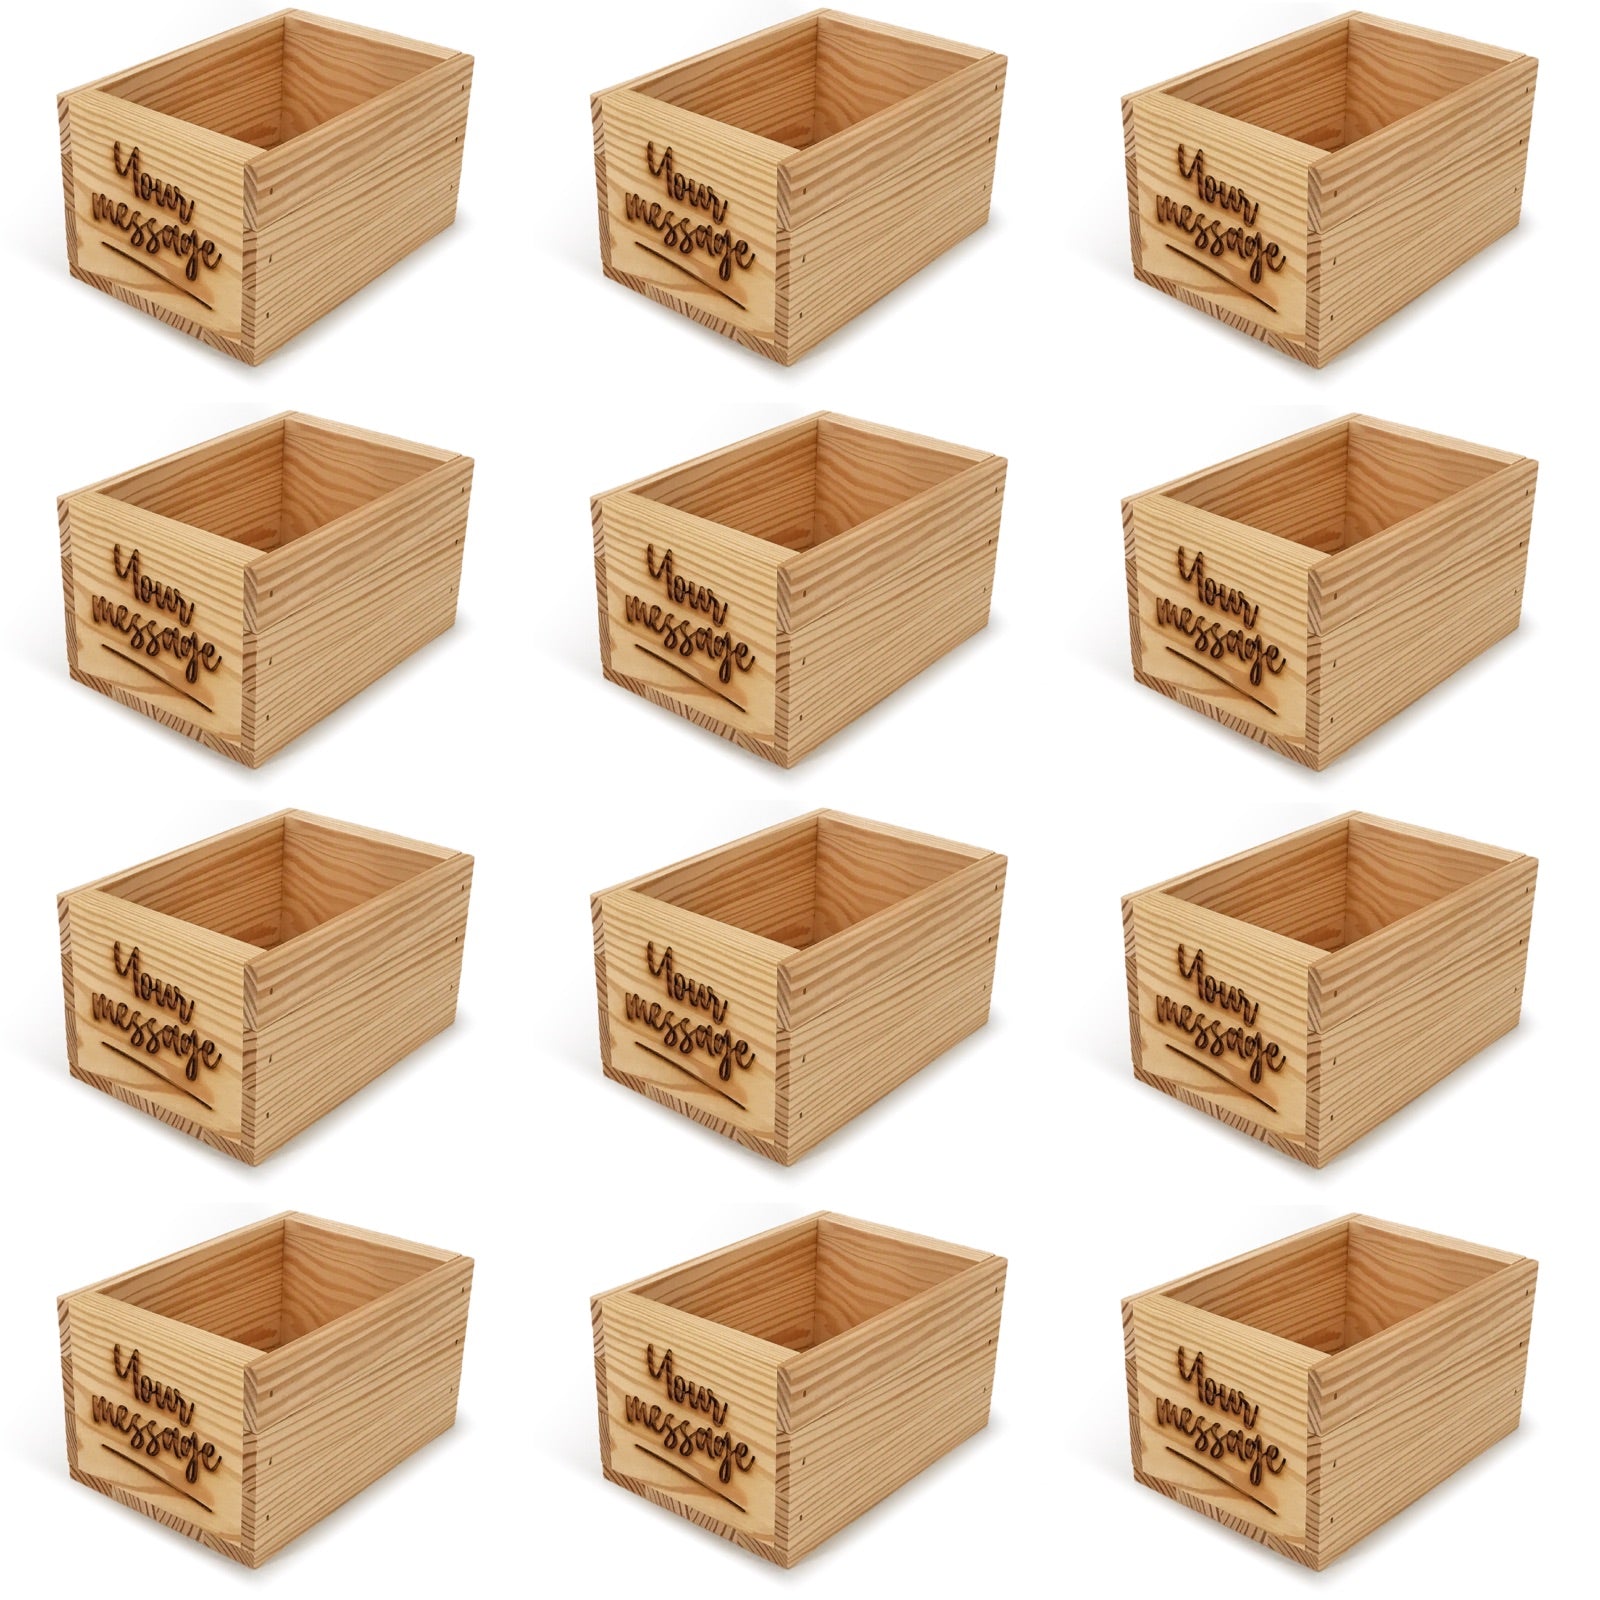 12 Small wooden crates with custom message 7x5x4.25